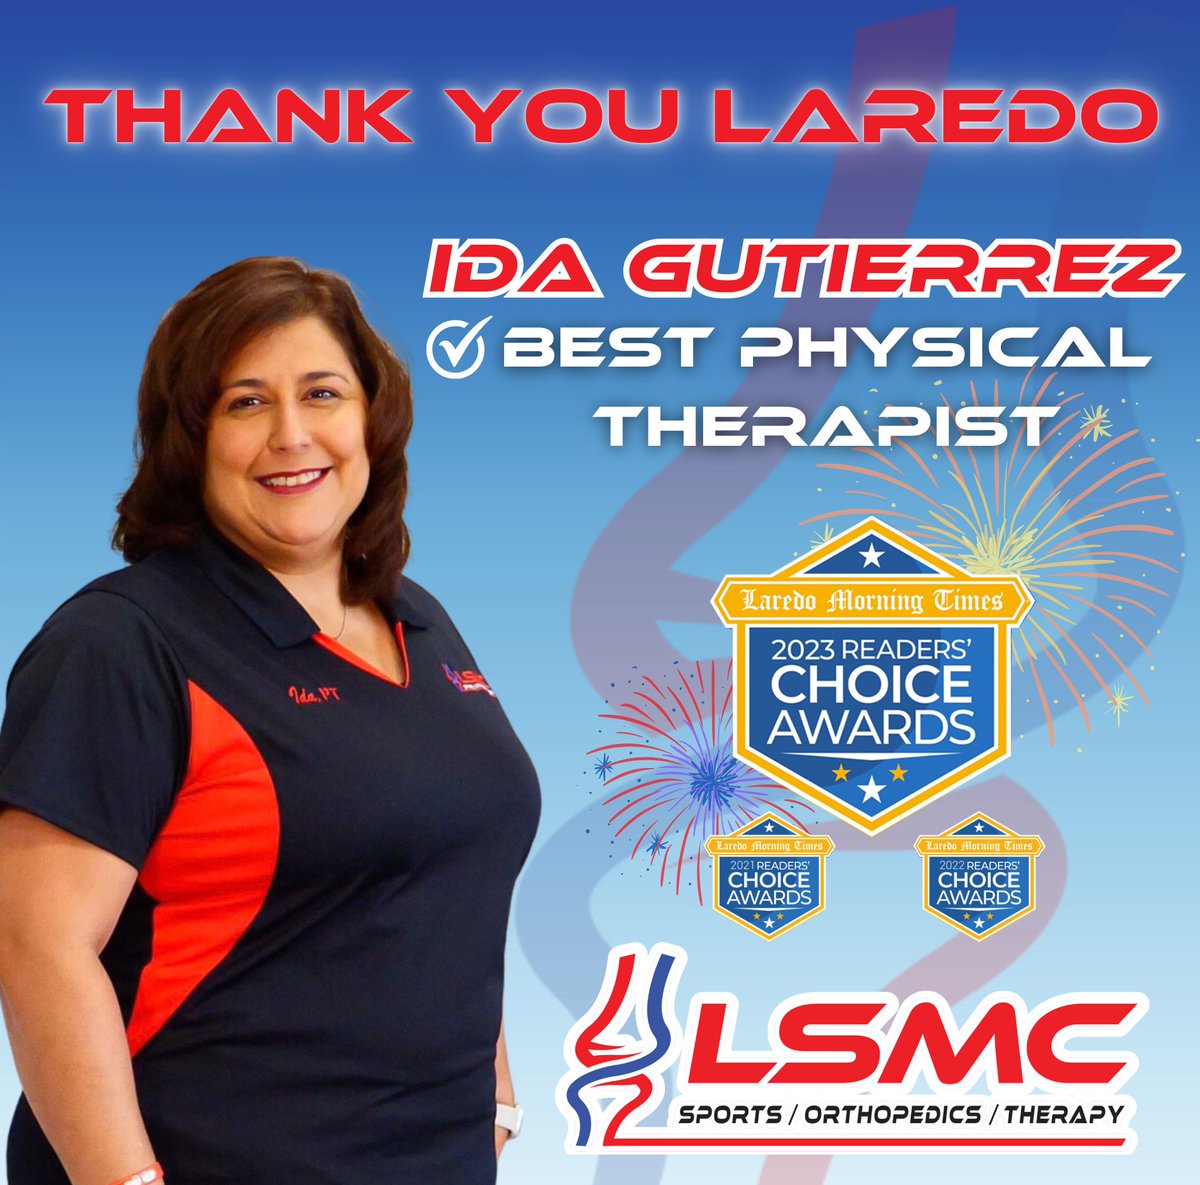 Congratulations to our exceptional Physical Therapist, Ida Gutierrez, for being Laredo's  Best Physical Therapist in the 2023 Readers Choice Awards! 🌟 🏆🎉 #BestPT #ExcellenceInCare #PatientFocused #LSMC #ReadersChoiceAwards2023